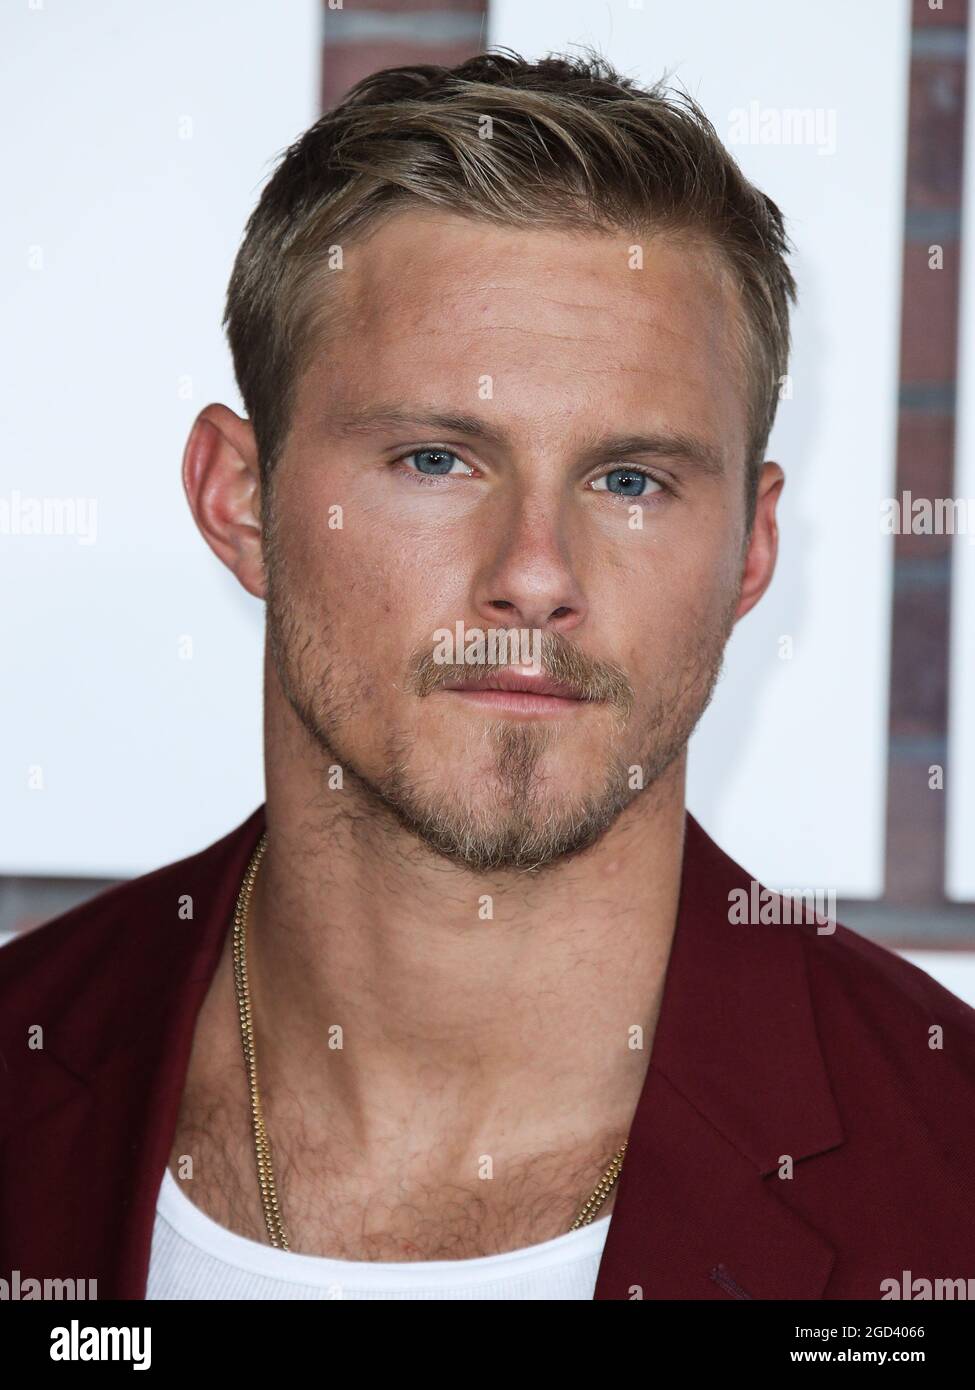 Alexander Ludwig : News, Pictures, Videos and More - Mediamass